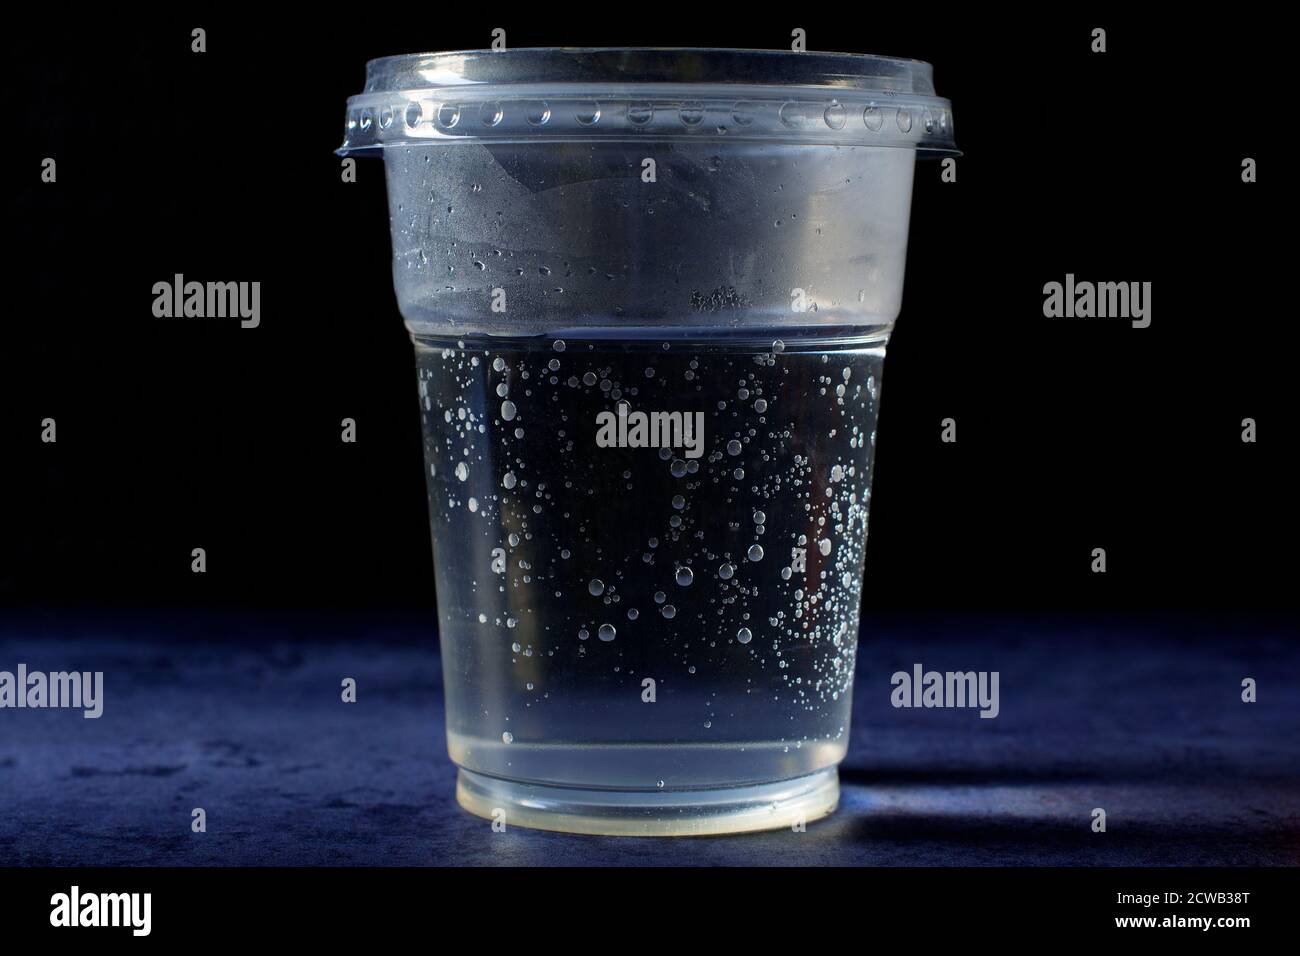 https://c8.alamy.com/comp/2CWB38T/a-plastic-cup-of-fresh-cold-tap-water-full-of-air-bubbles-the-cup-has-a-plastic-lid-on-it-and-it-is-standing-on-deep-blue-background-2CWB38T.jpg